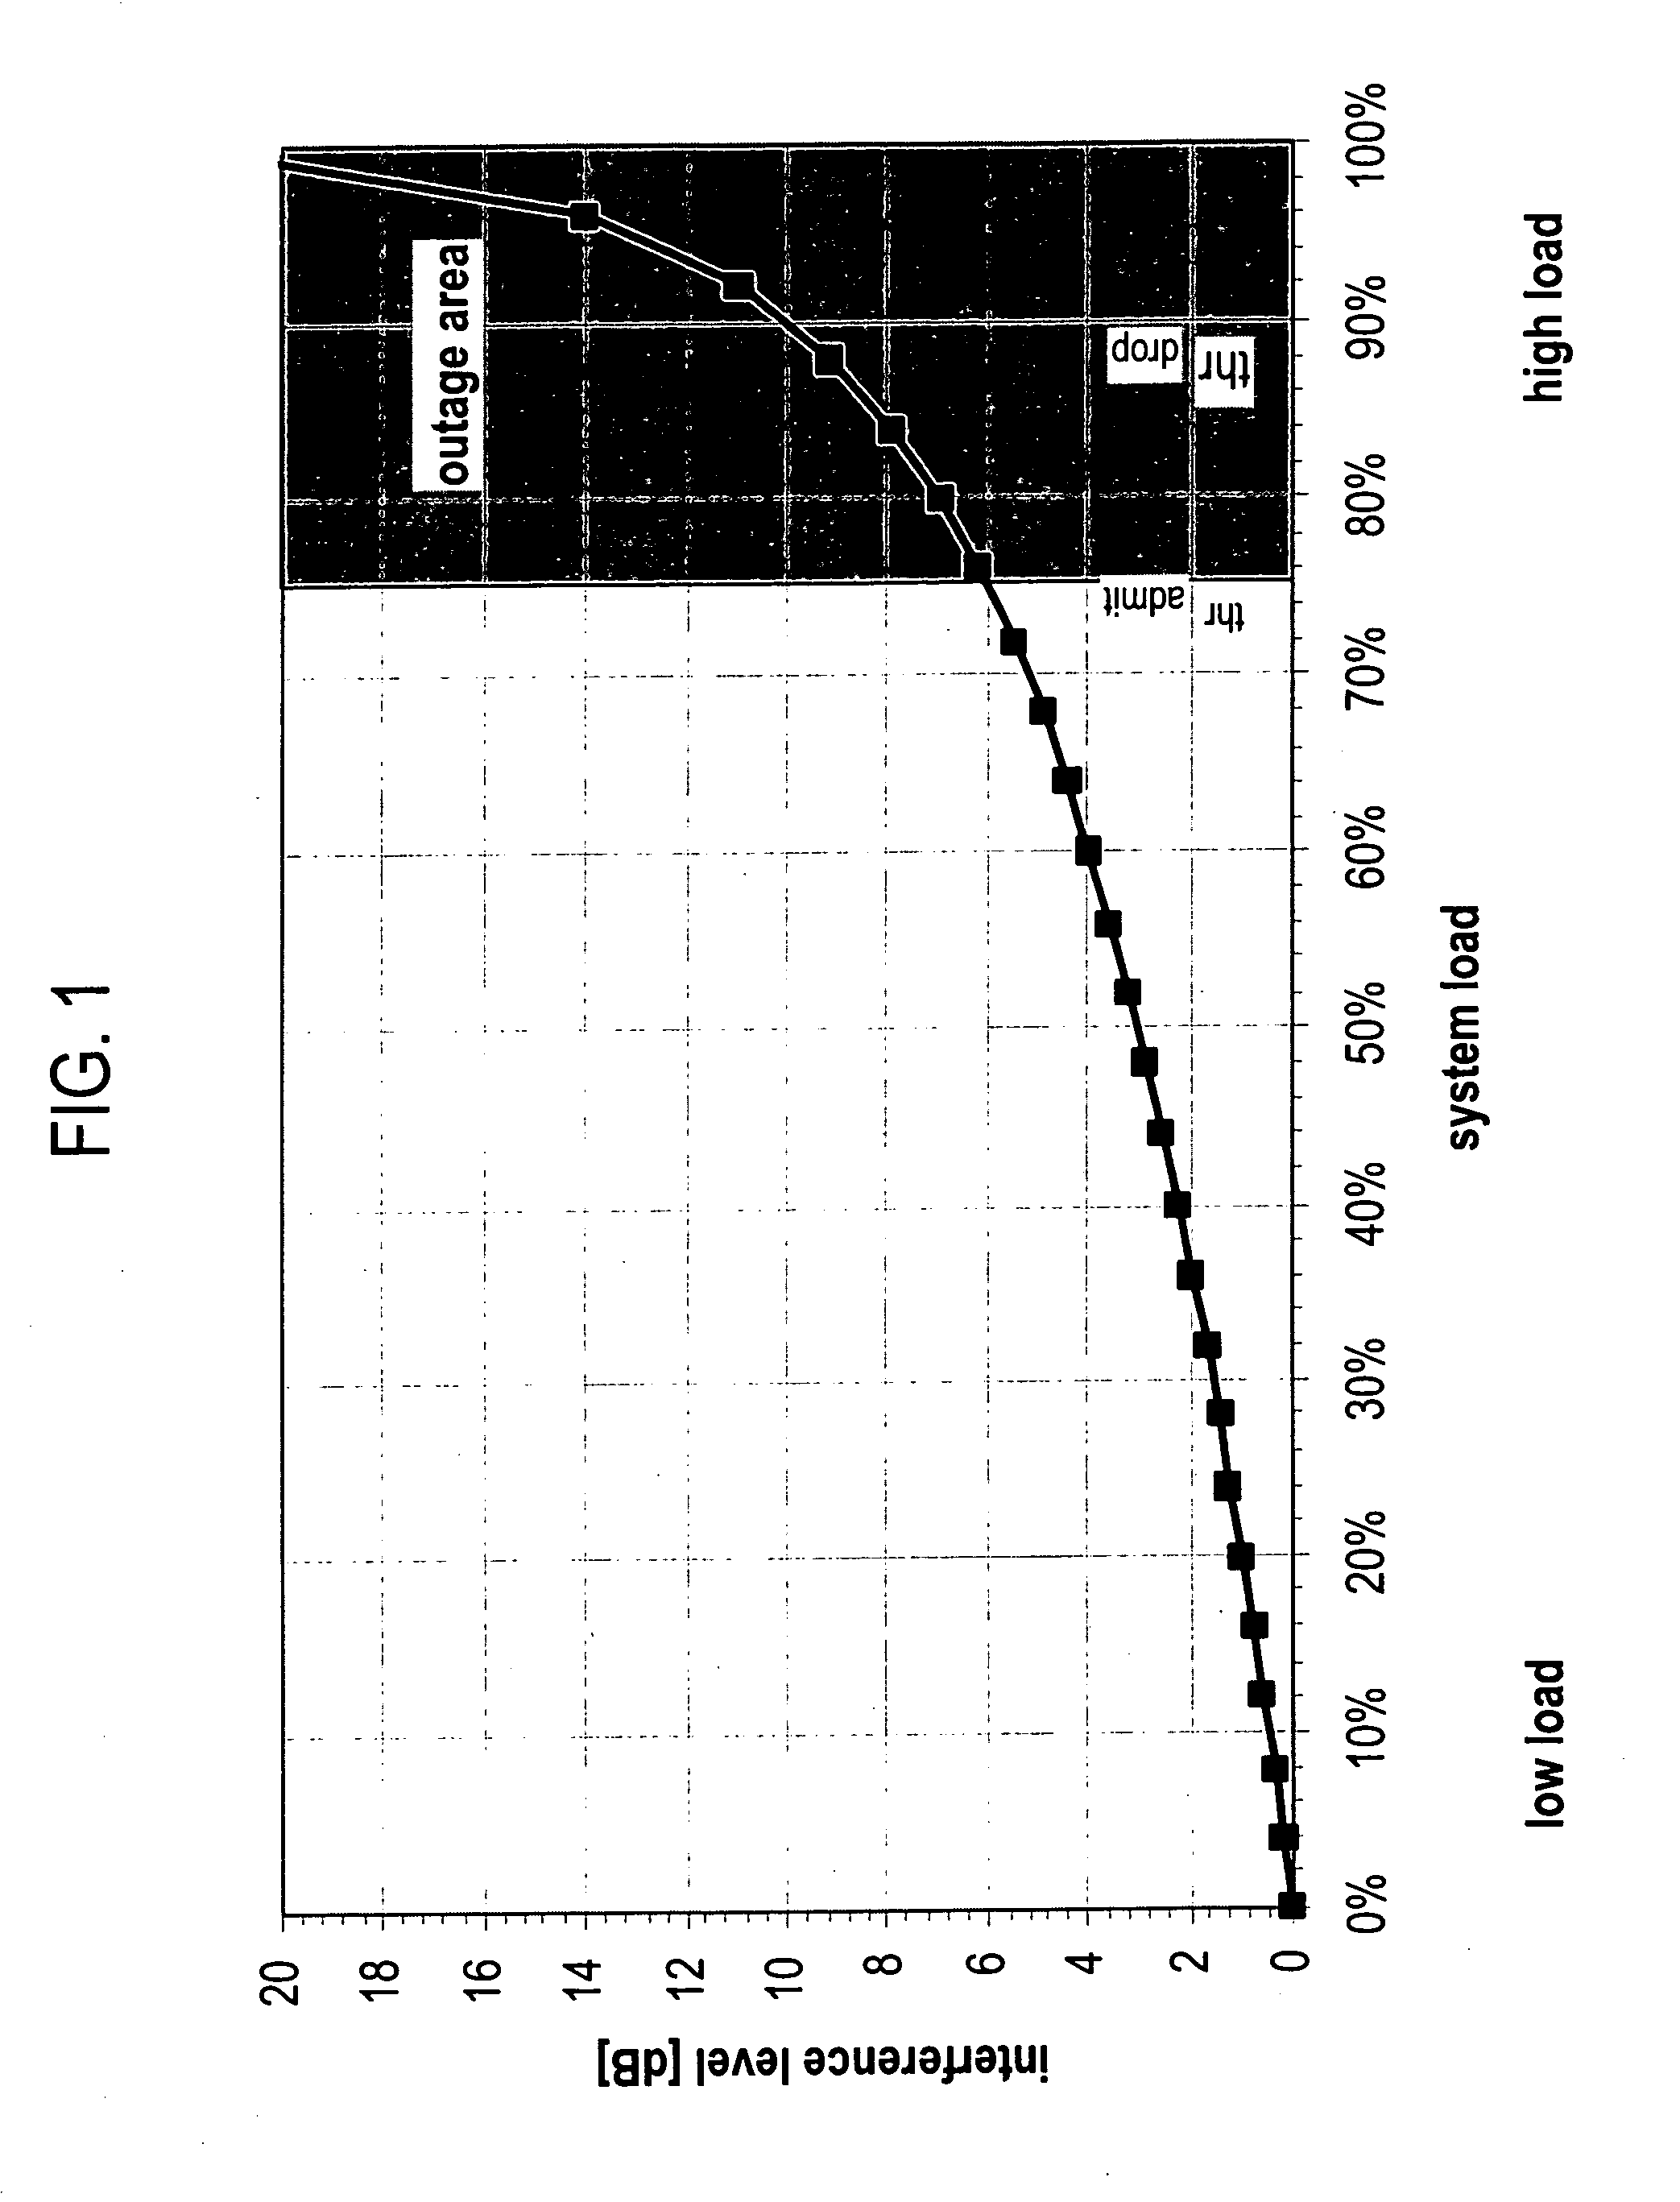 Methods of power overload control in communication systems